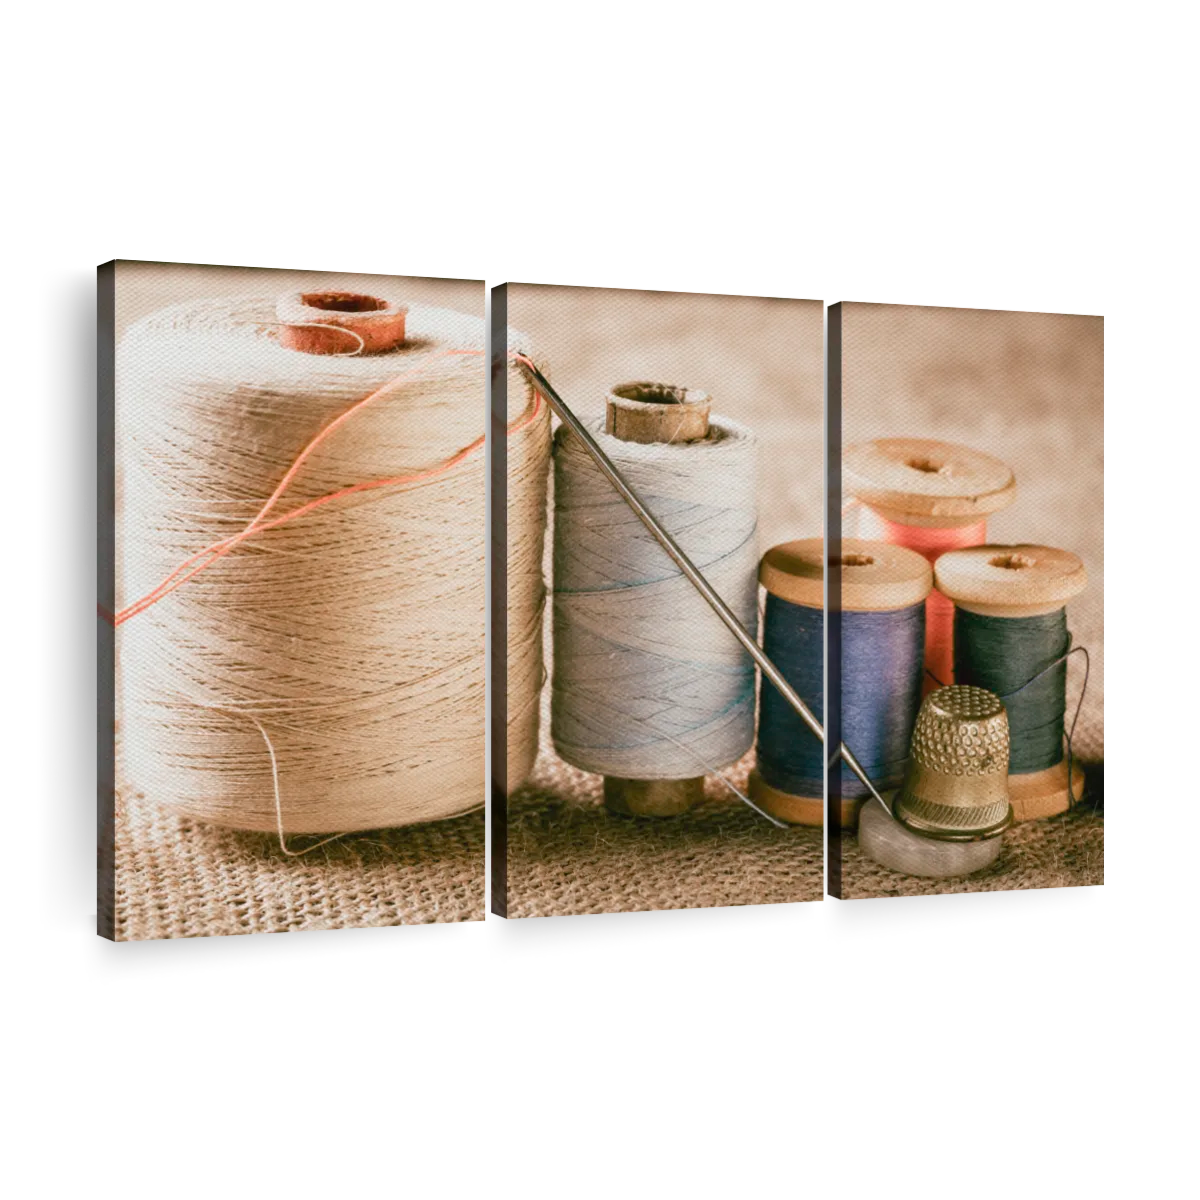 Sewing Threads And Needle Art: Canvas Prints, Frames & Posters